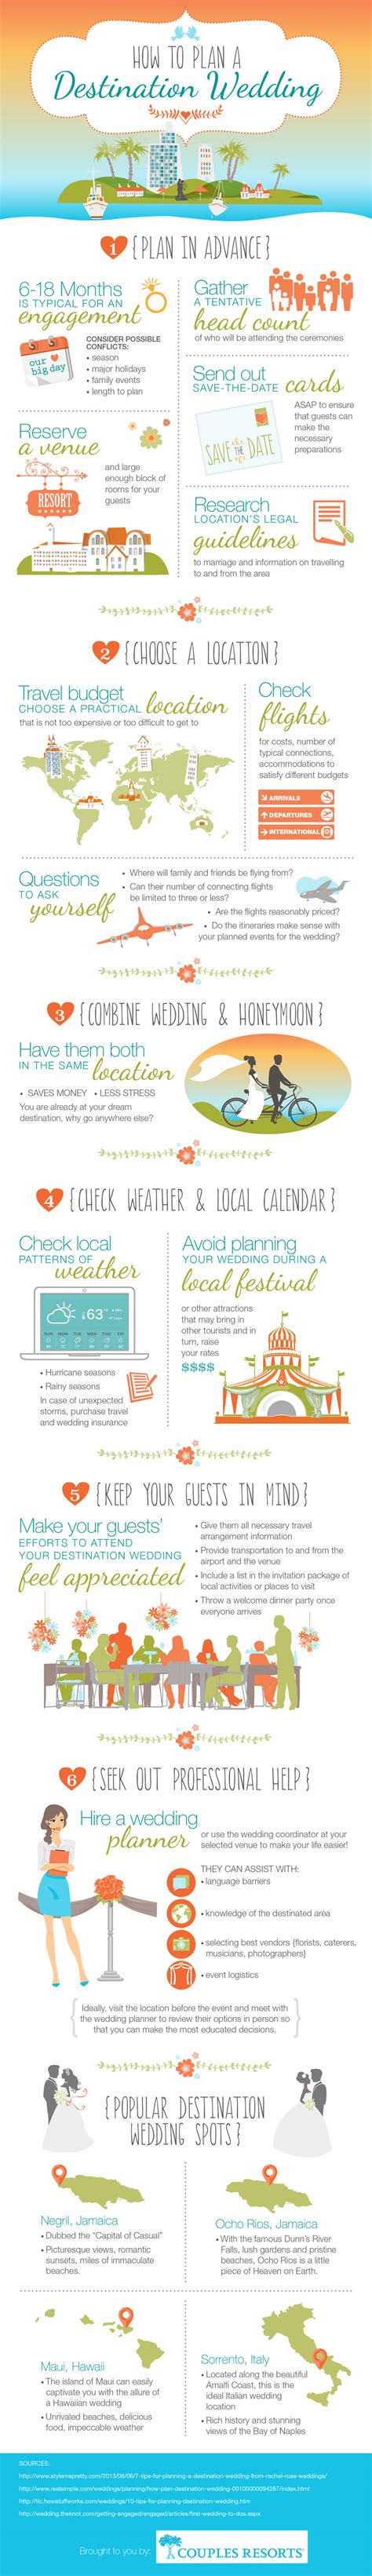 how to plan a destination wedding [infographic]